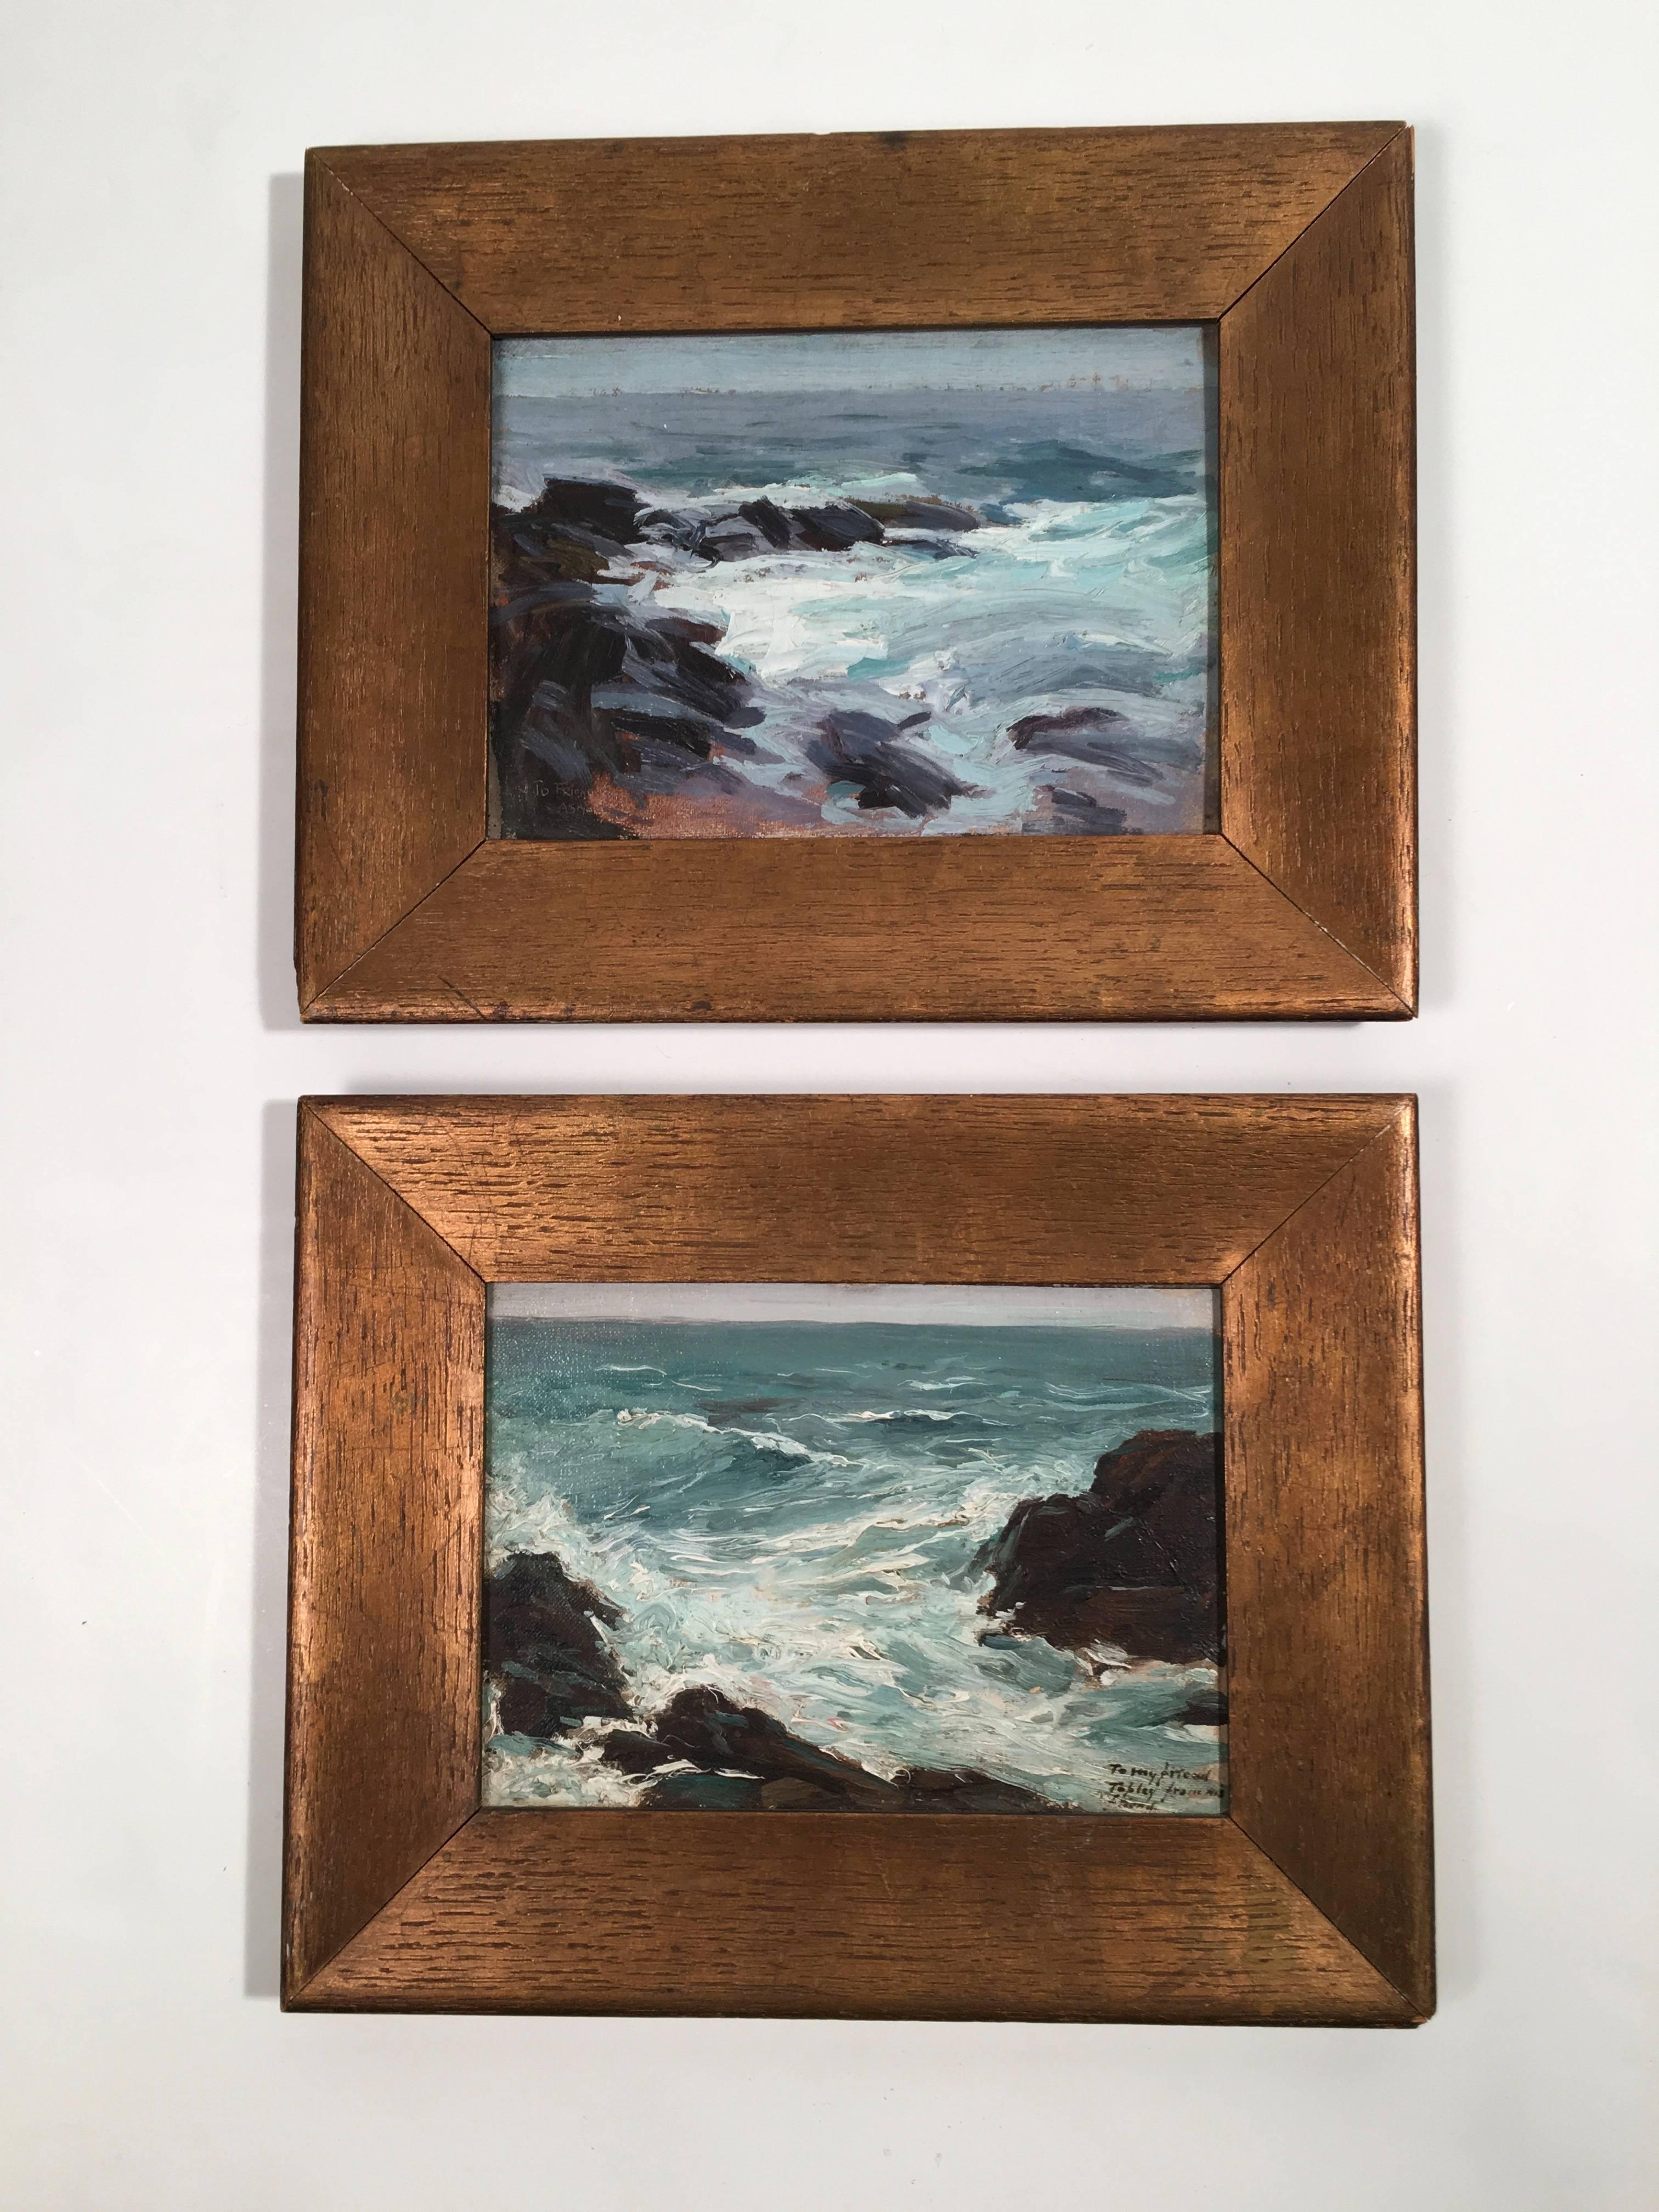 A pair of small, atmospheric seascape paintings, oil on board, in the manner of Edward Henry Potthast (1857-1927), depicting the rocky New England coast, likely Cape Ann, on the North Shore of Boston or Maine, in their original wide gilded oak